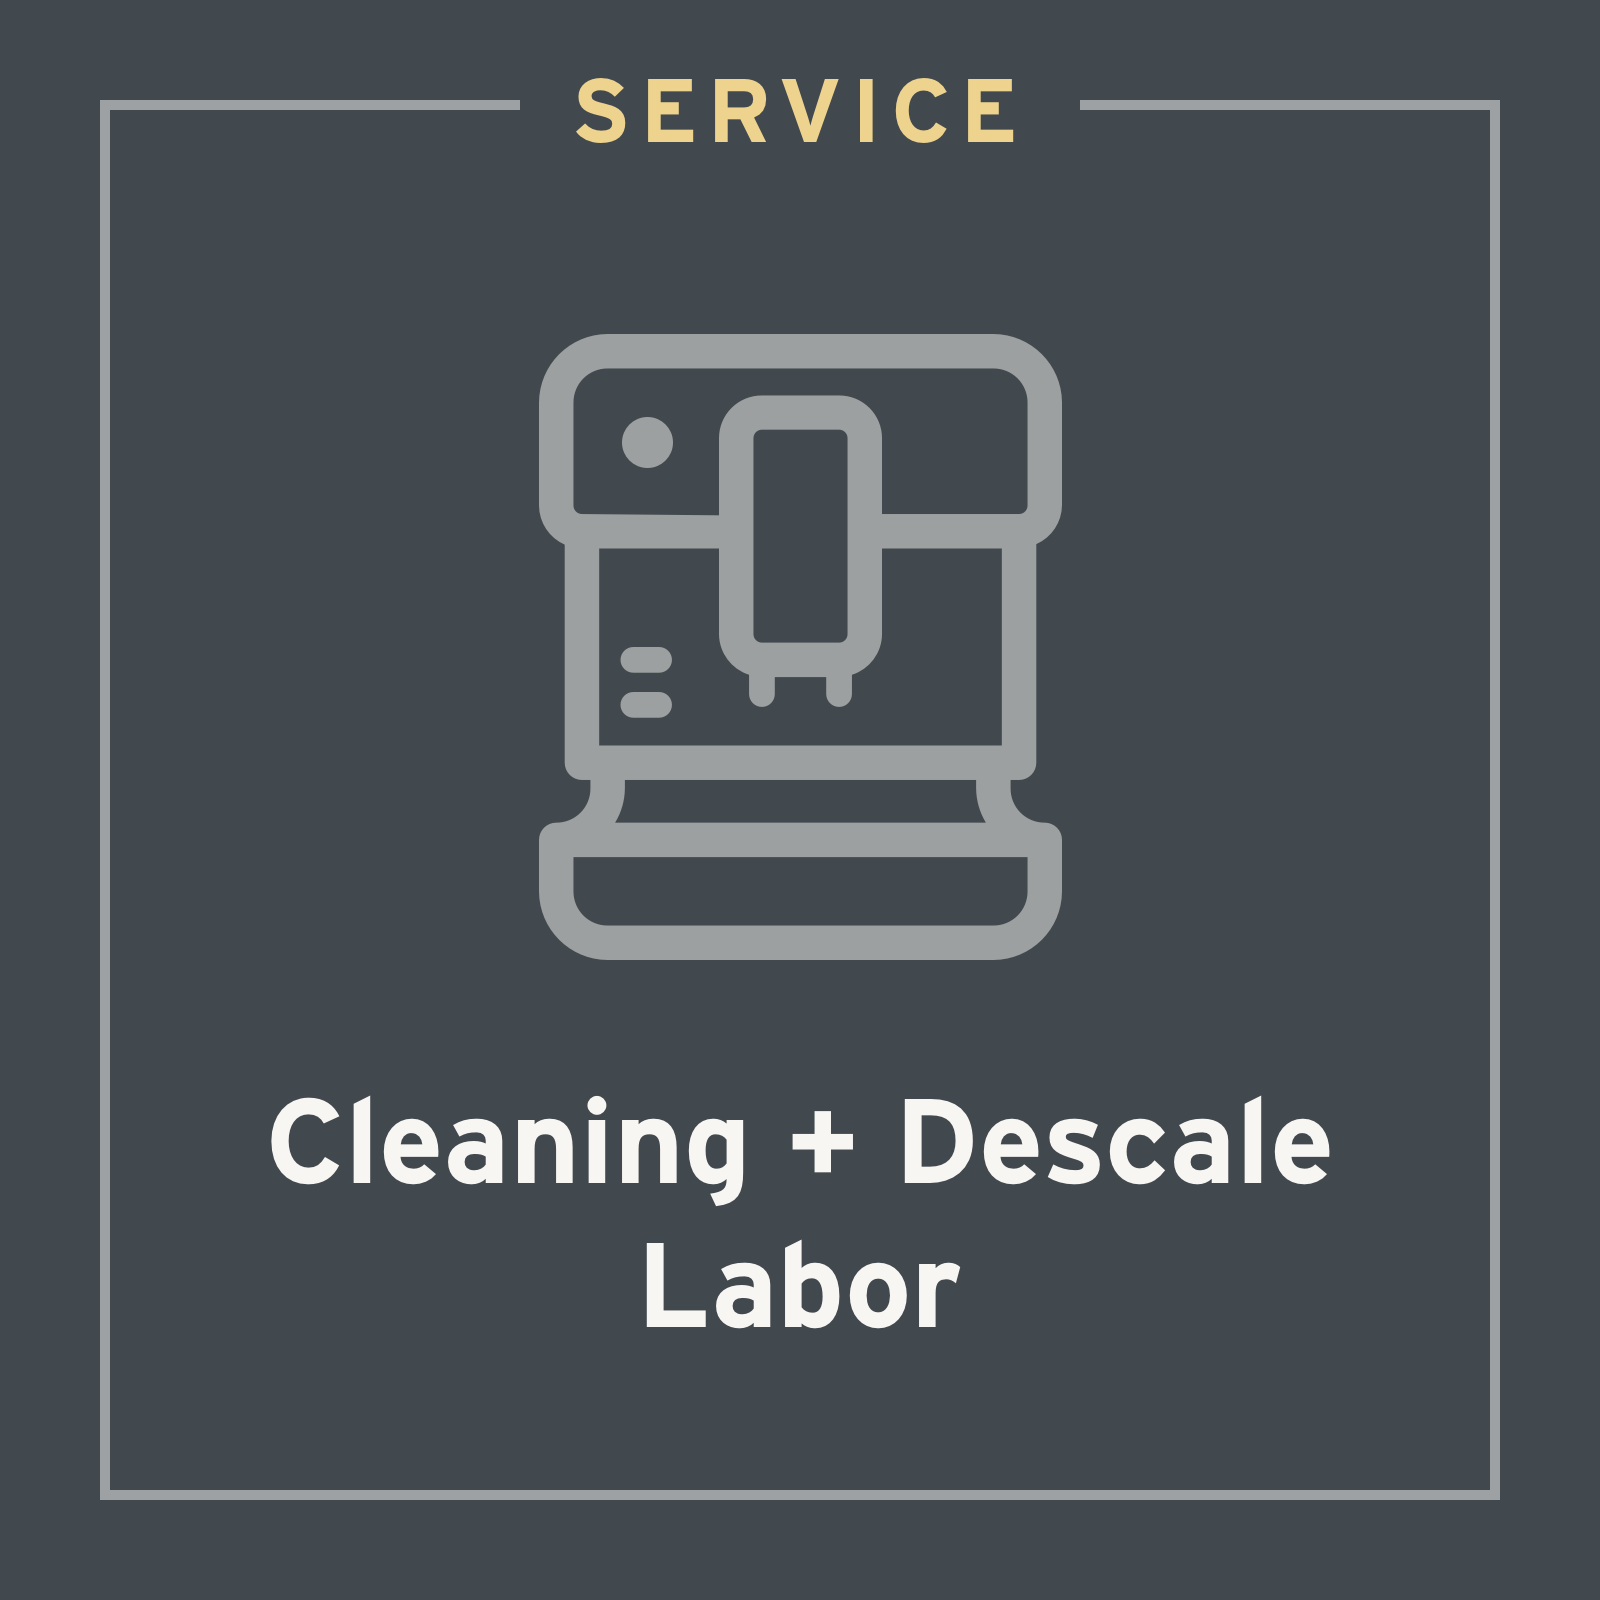 Cleaning + Descale (Service)